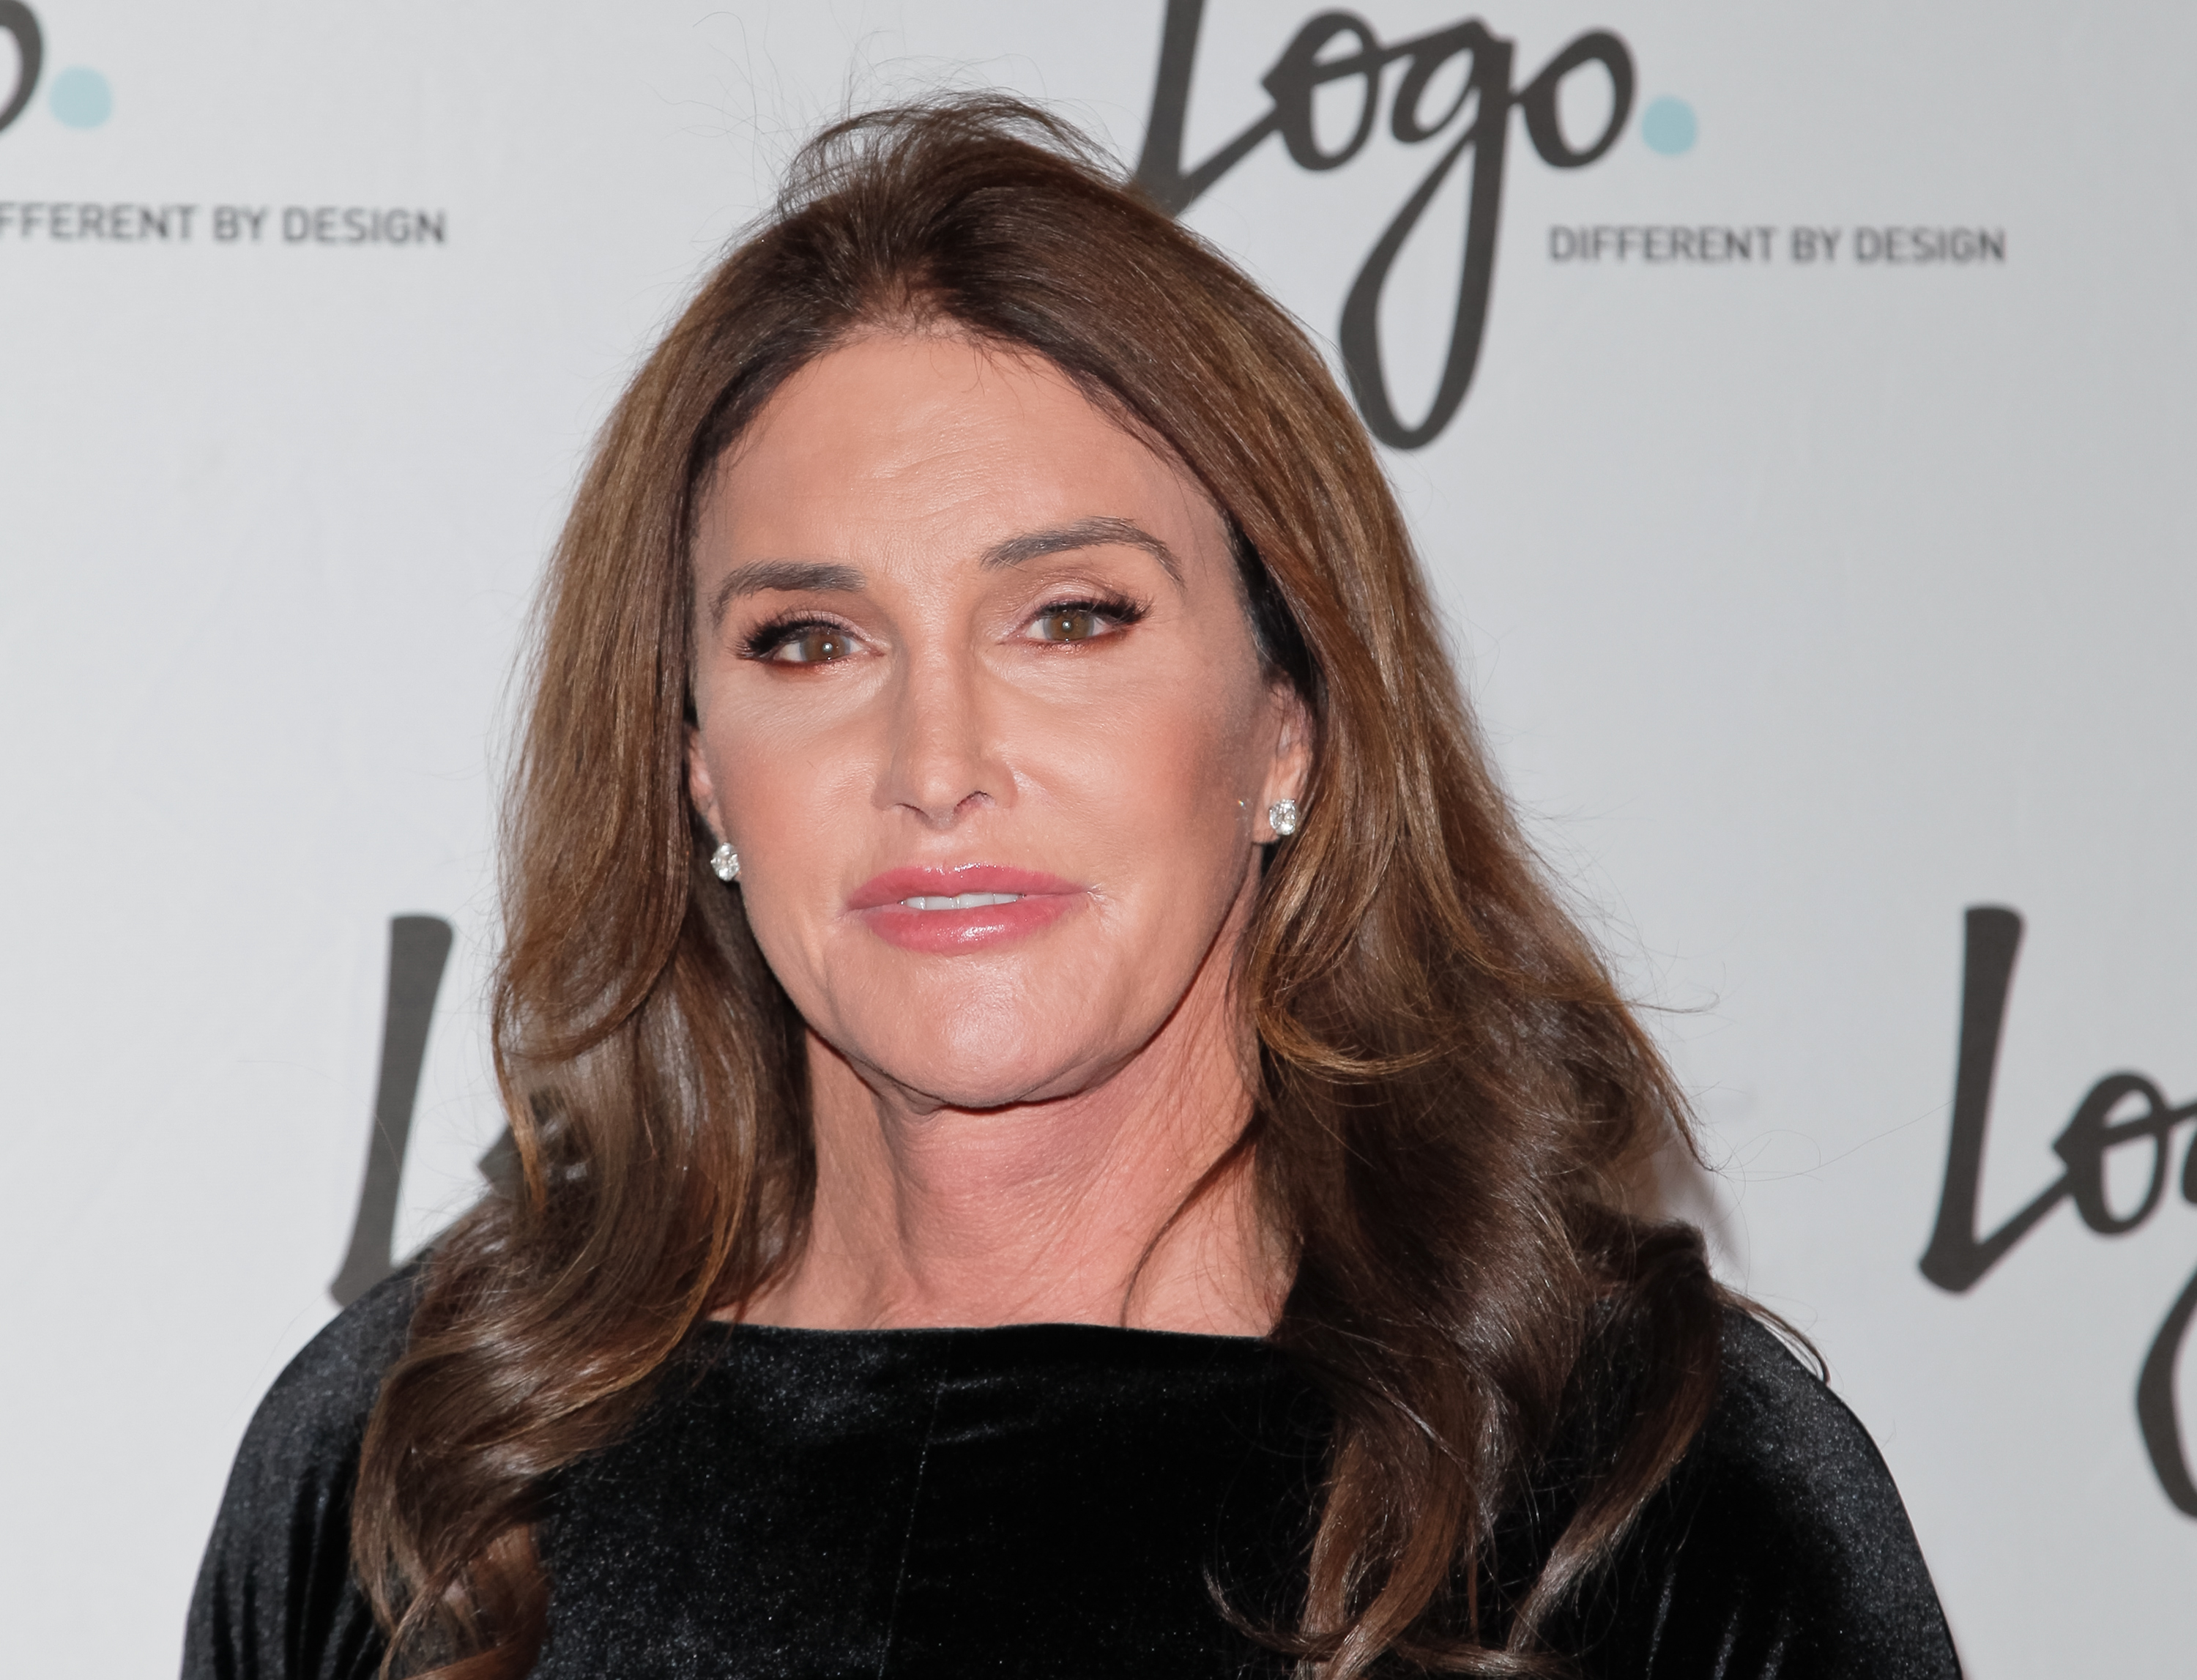 Caitlyn Jenner attends Logo TV's 'Beautiful As I Want To Be' web series launch party at The Standard Hotel on October 27, 2015 in Los Angeles, California. (Tibrina Hobson/Getty Images)